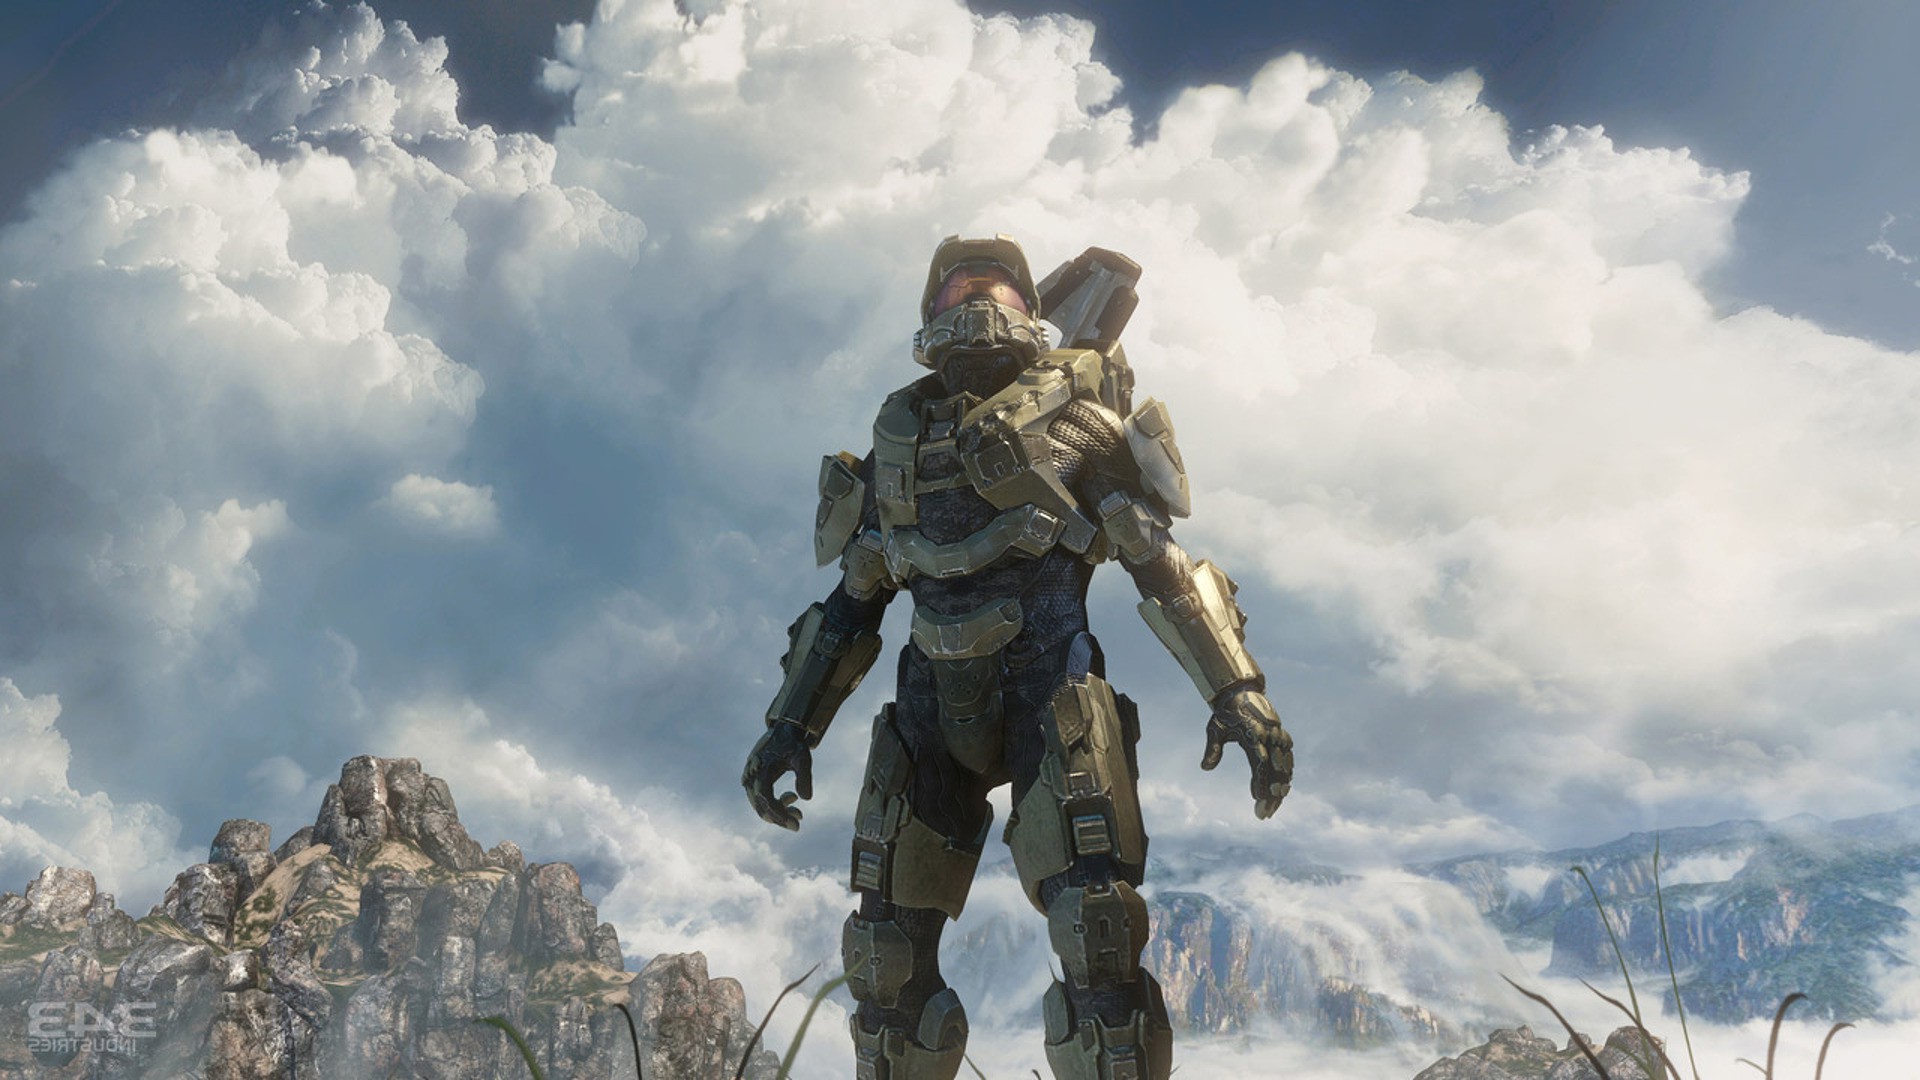 Halo, Video Games, Artwork, Halo 4, Halo: Master Chief Collection, Master Chief, Sky, Clouds, Spartans, Weapon Wallpaper